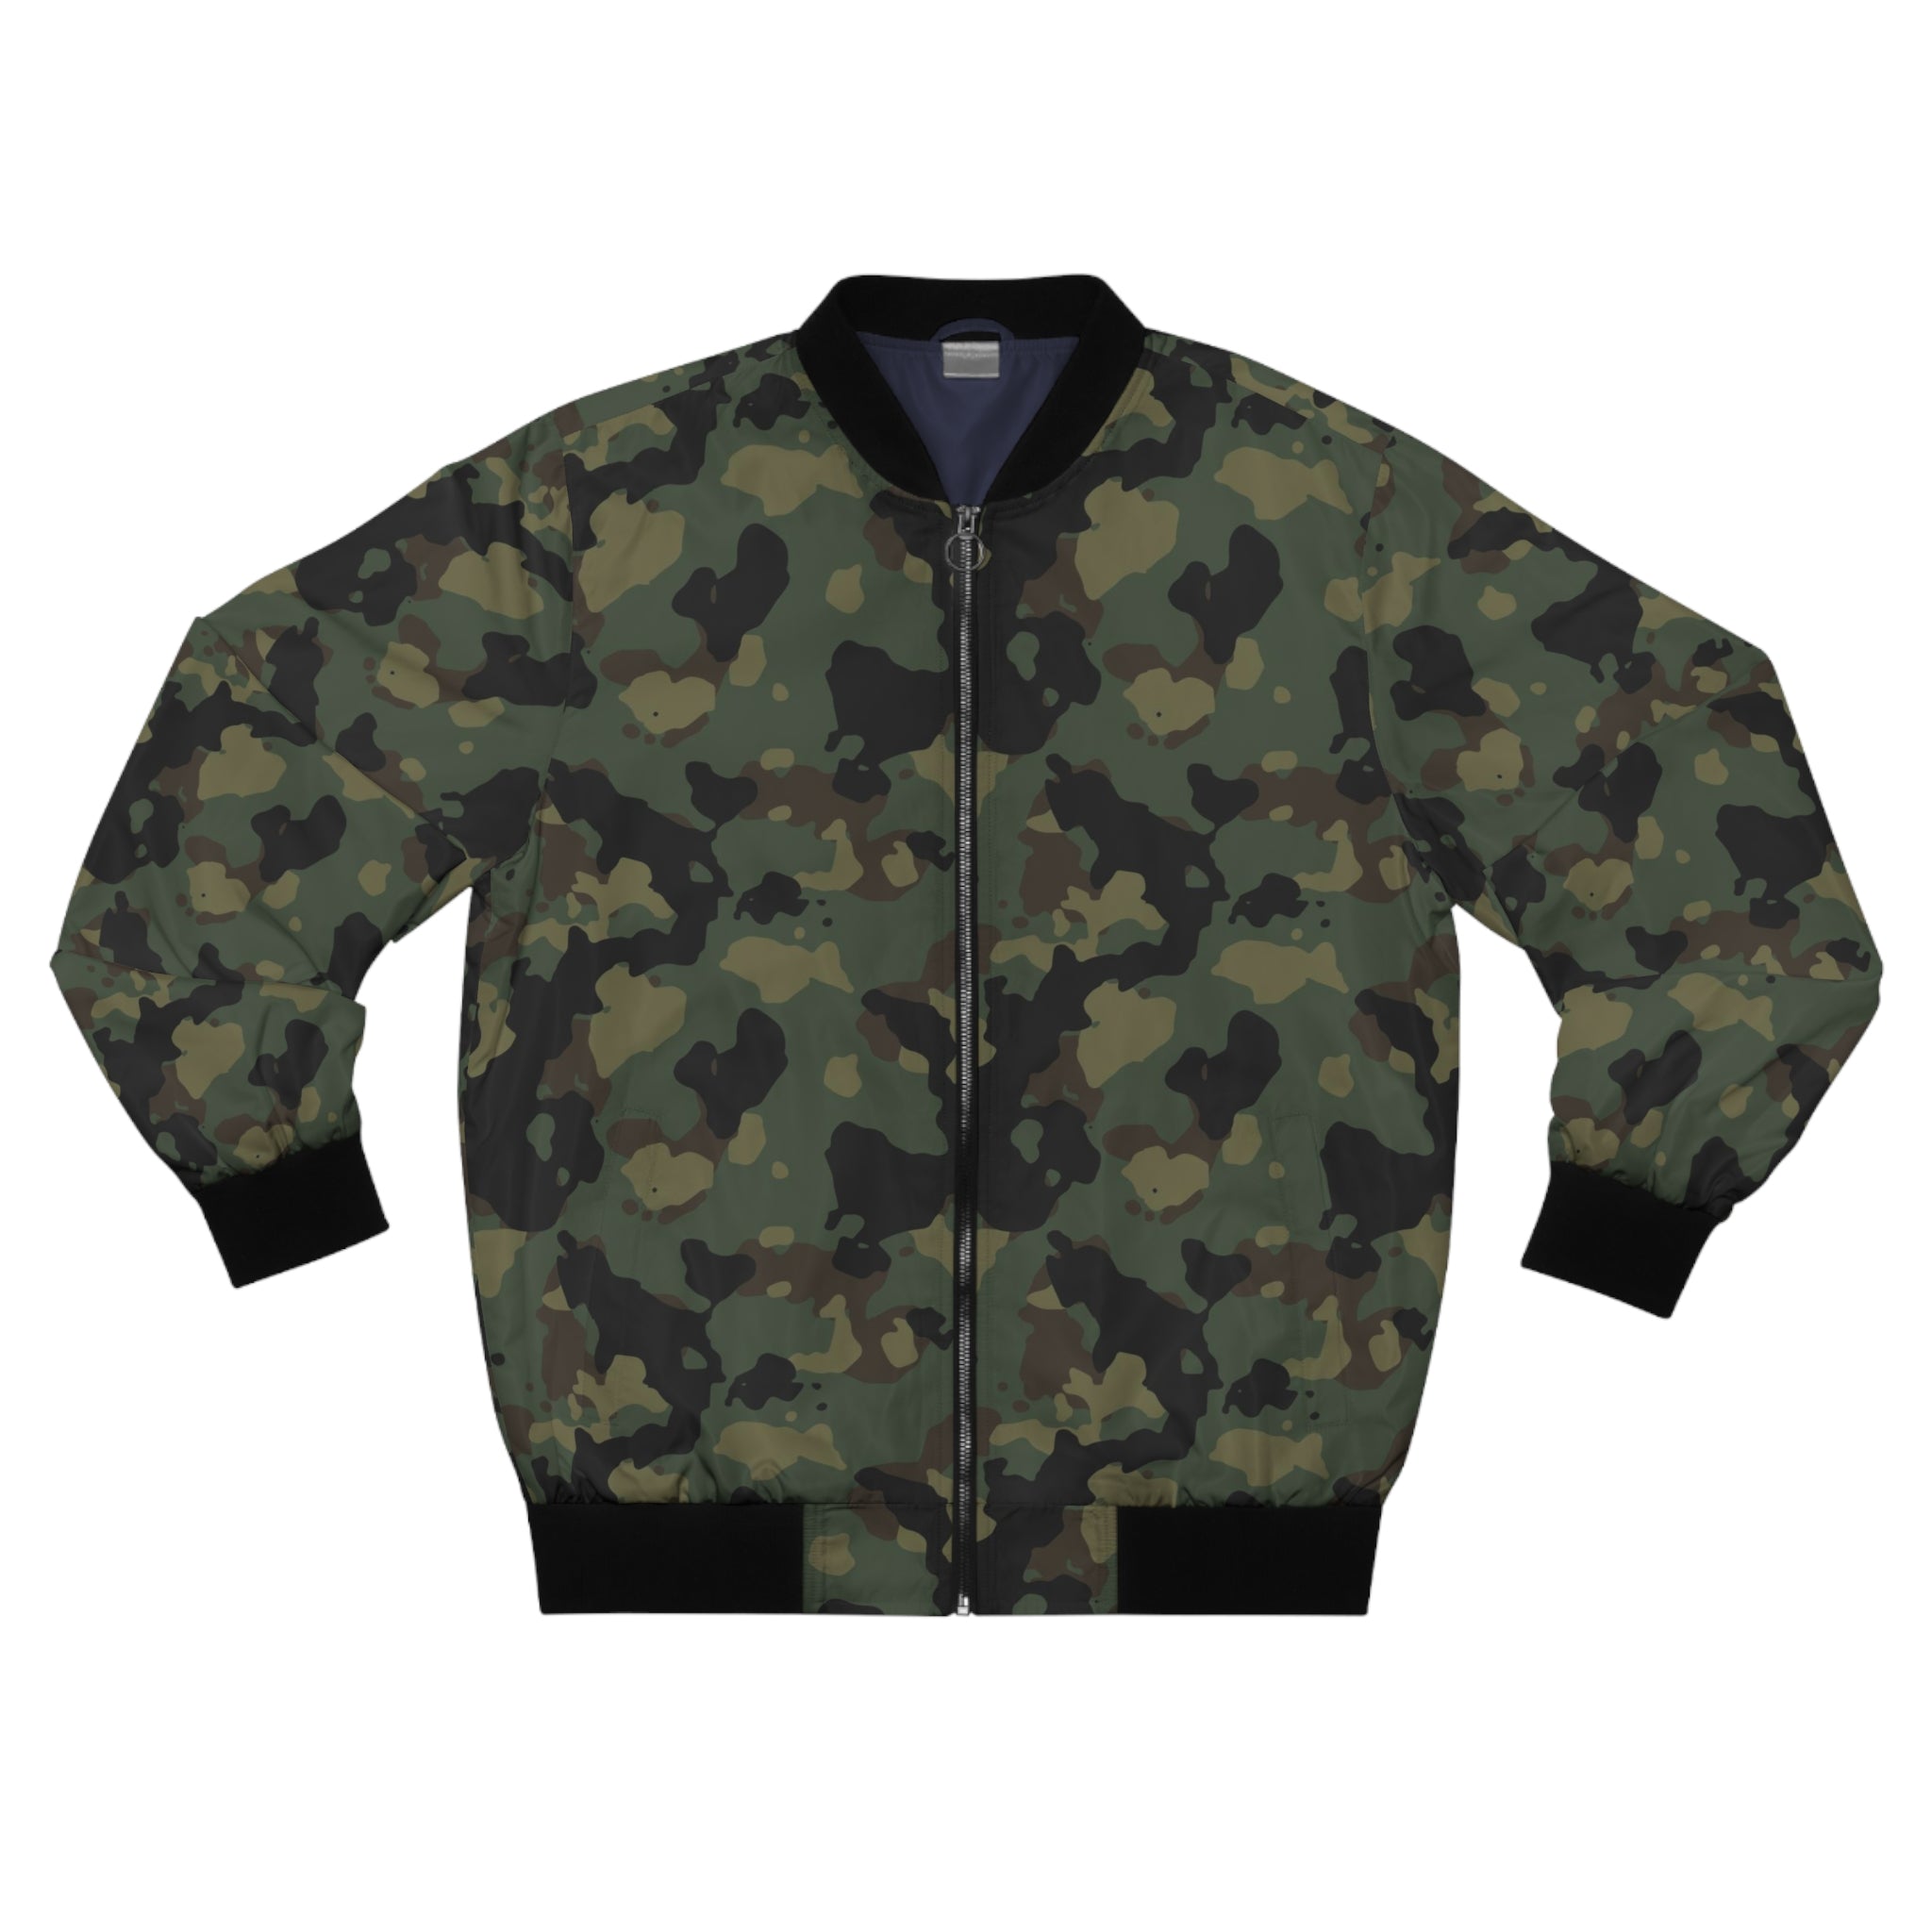 Men's Classic Deep Jungle Army Camouflage Military Fashion Bomber Jacket